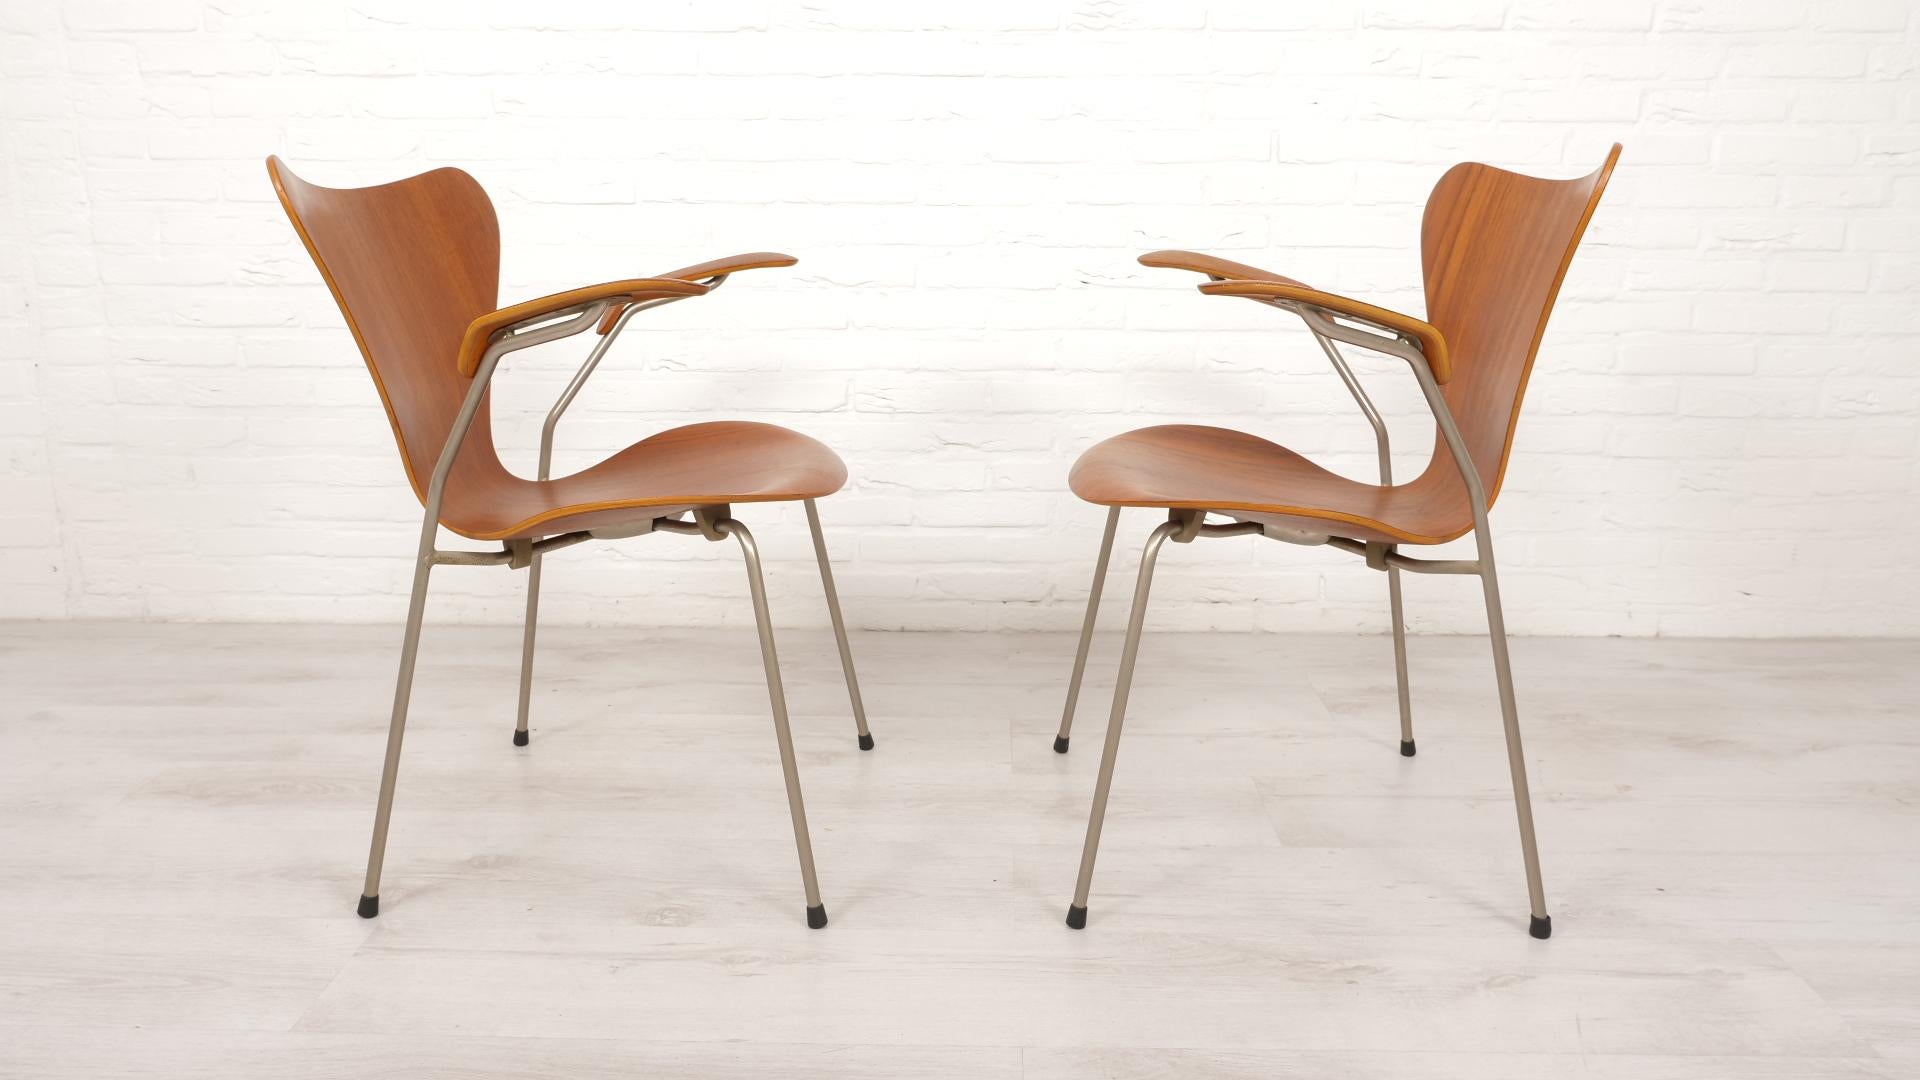 2 Vintage butterfly chairs with armrests by Arne Jacobsen model 3207 Teak For Sale 5